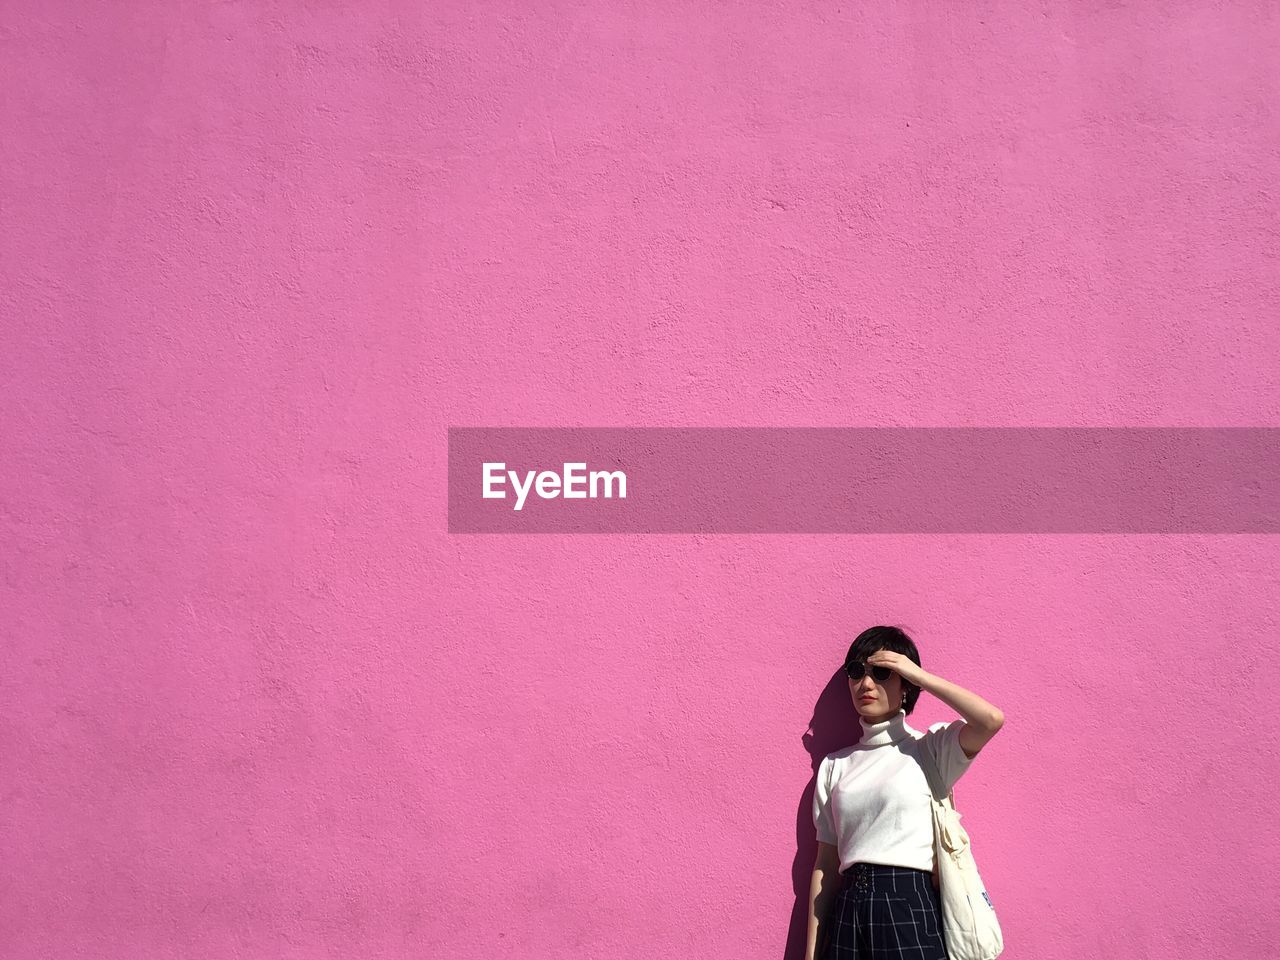 Woman by a pink wall